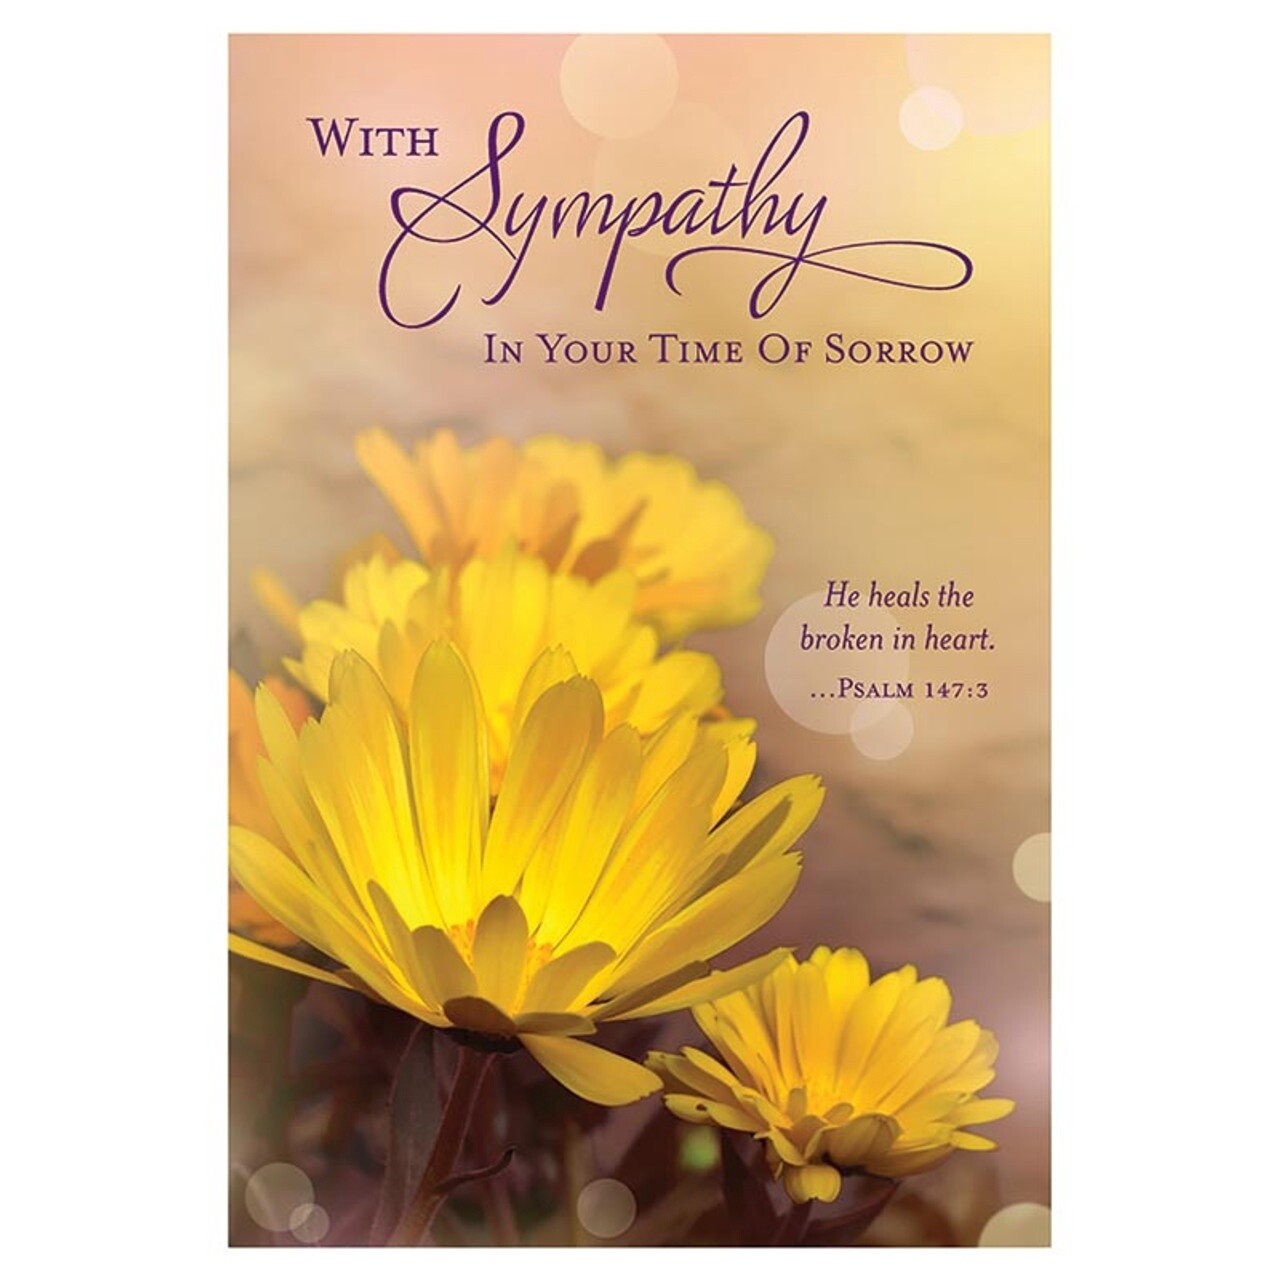 With Sympathy in Your Time of Sorrow Card With Sympathy in Your Time of Sorrow Card